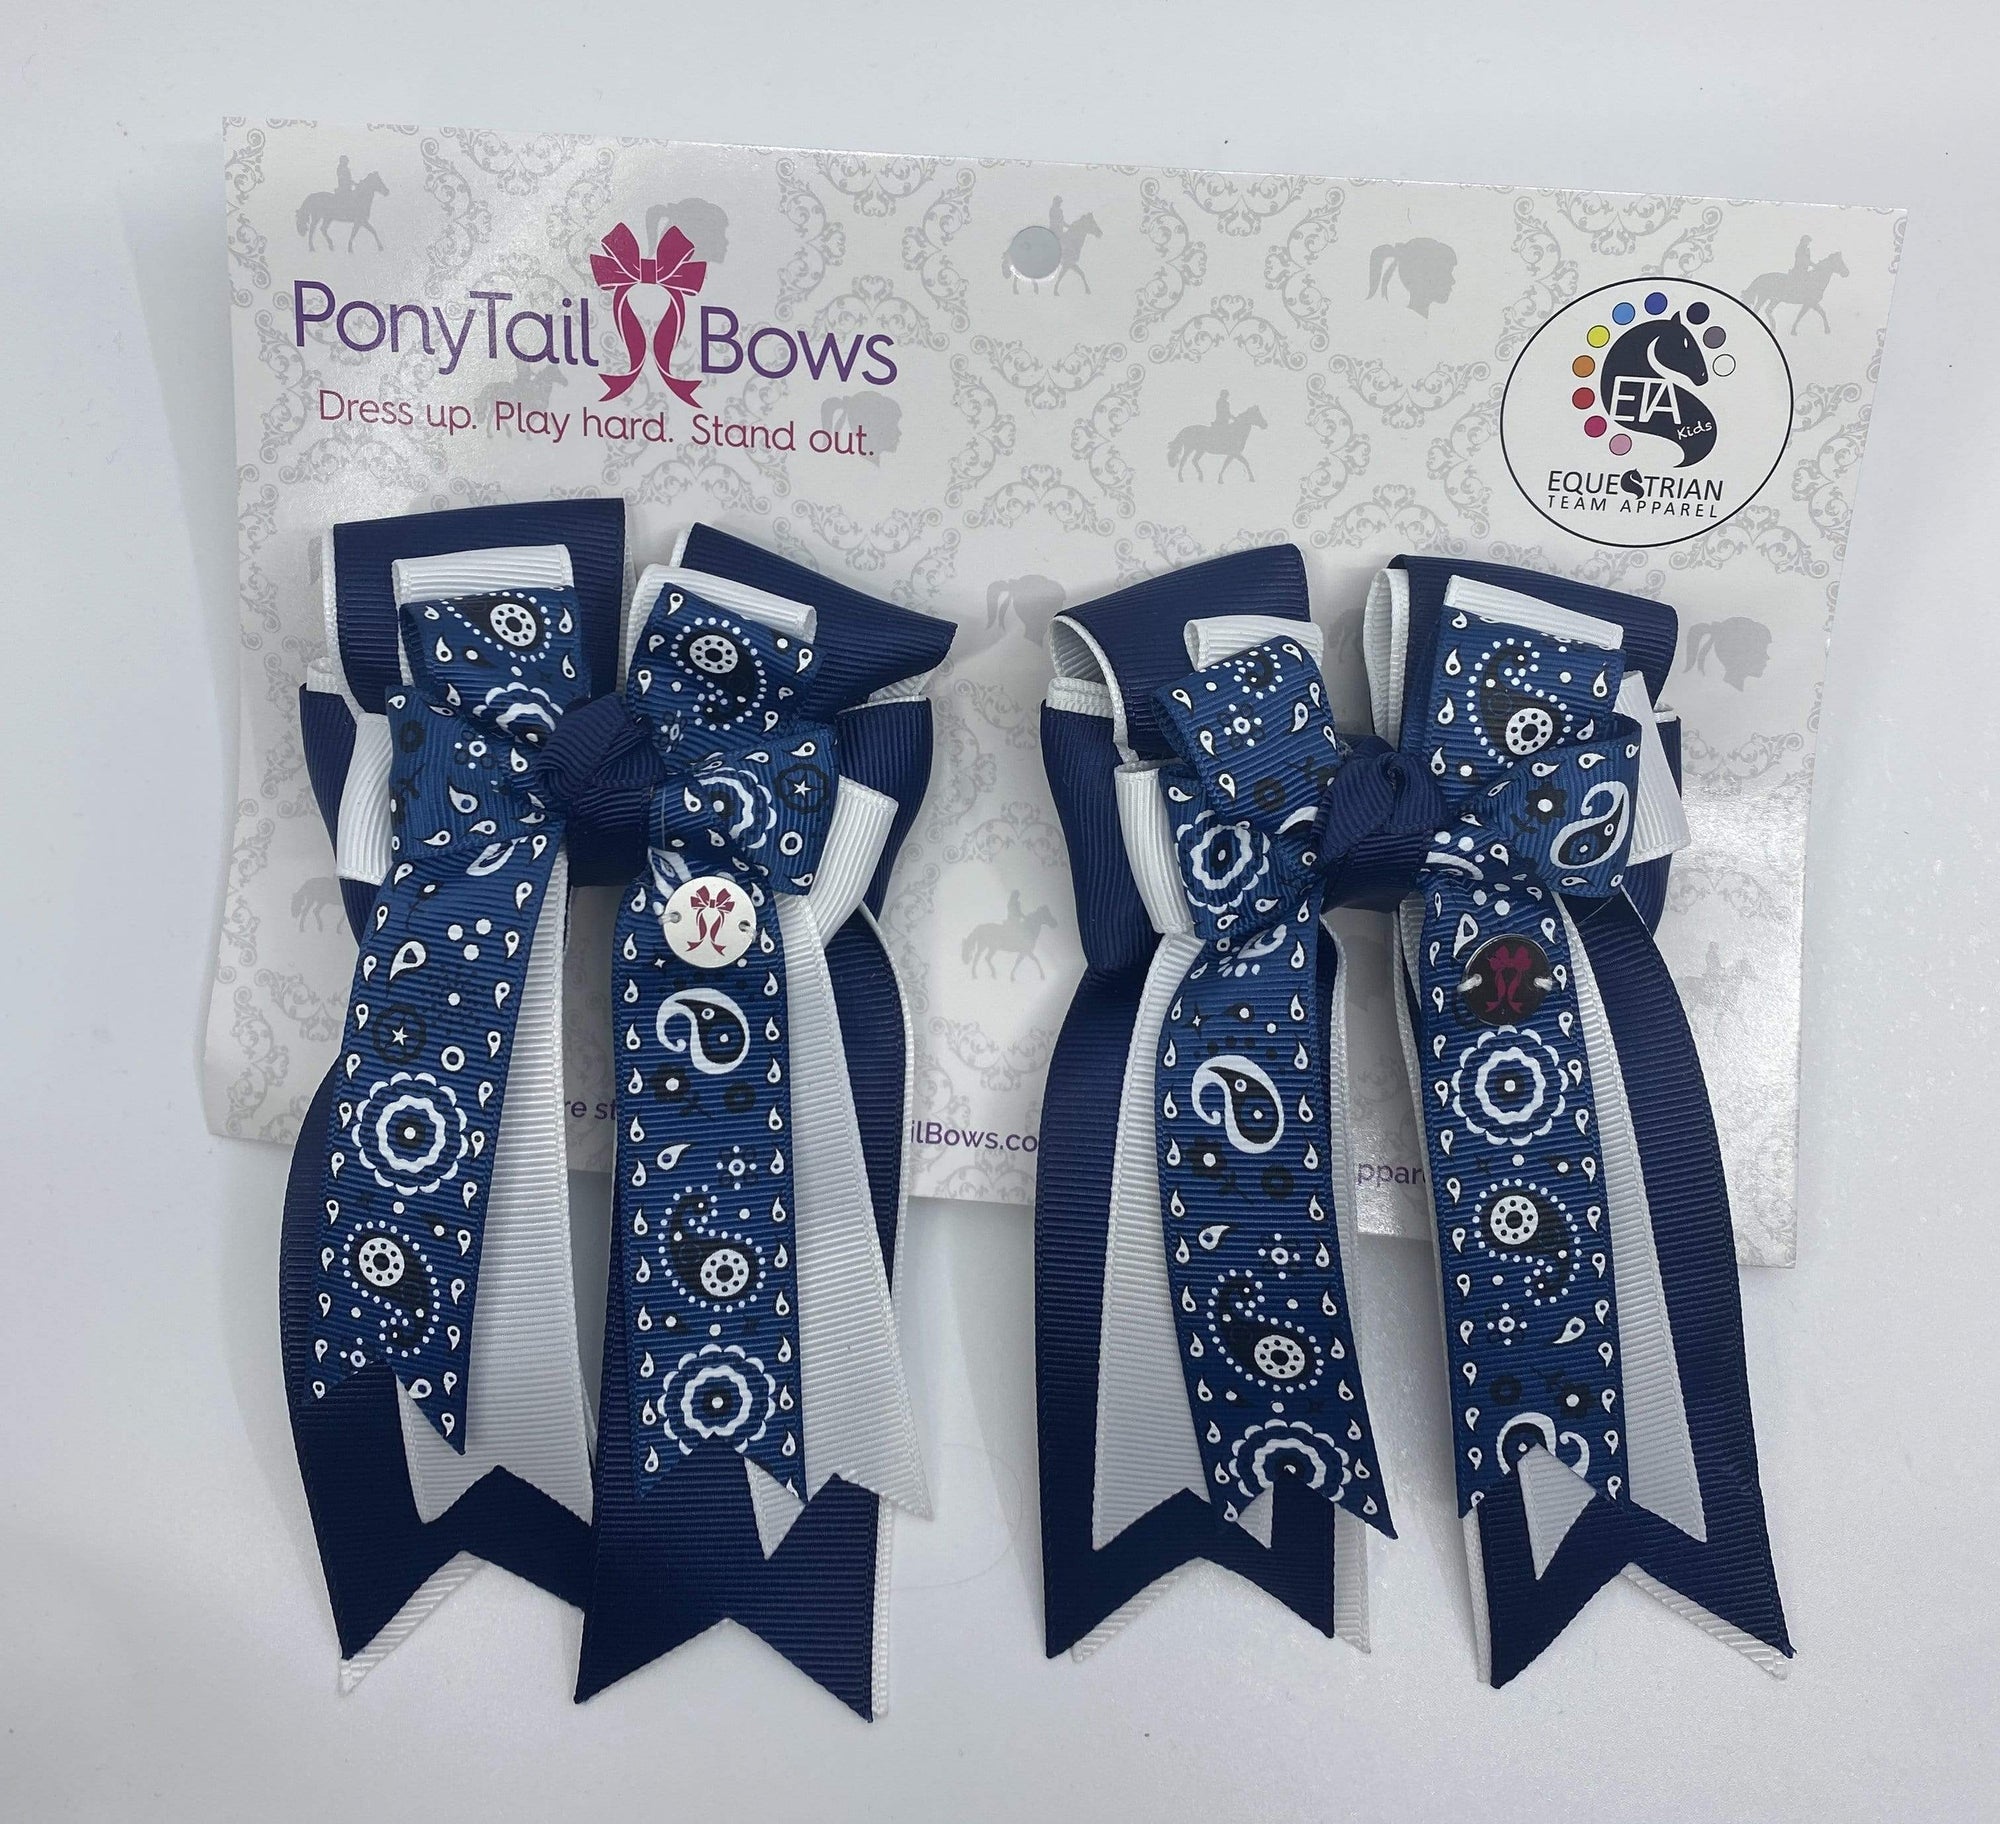 PonyTail Bows 3" Tails Navy Blue Bandana Bows equestrian team apparel online tack store mobile tack store custom farm apparel custom show stable clothing equestrian lifestyle horse show clothing riding clothes PonyTail Bows | Equestrian Hair Accessories horses equestrian tack store